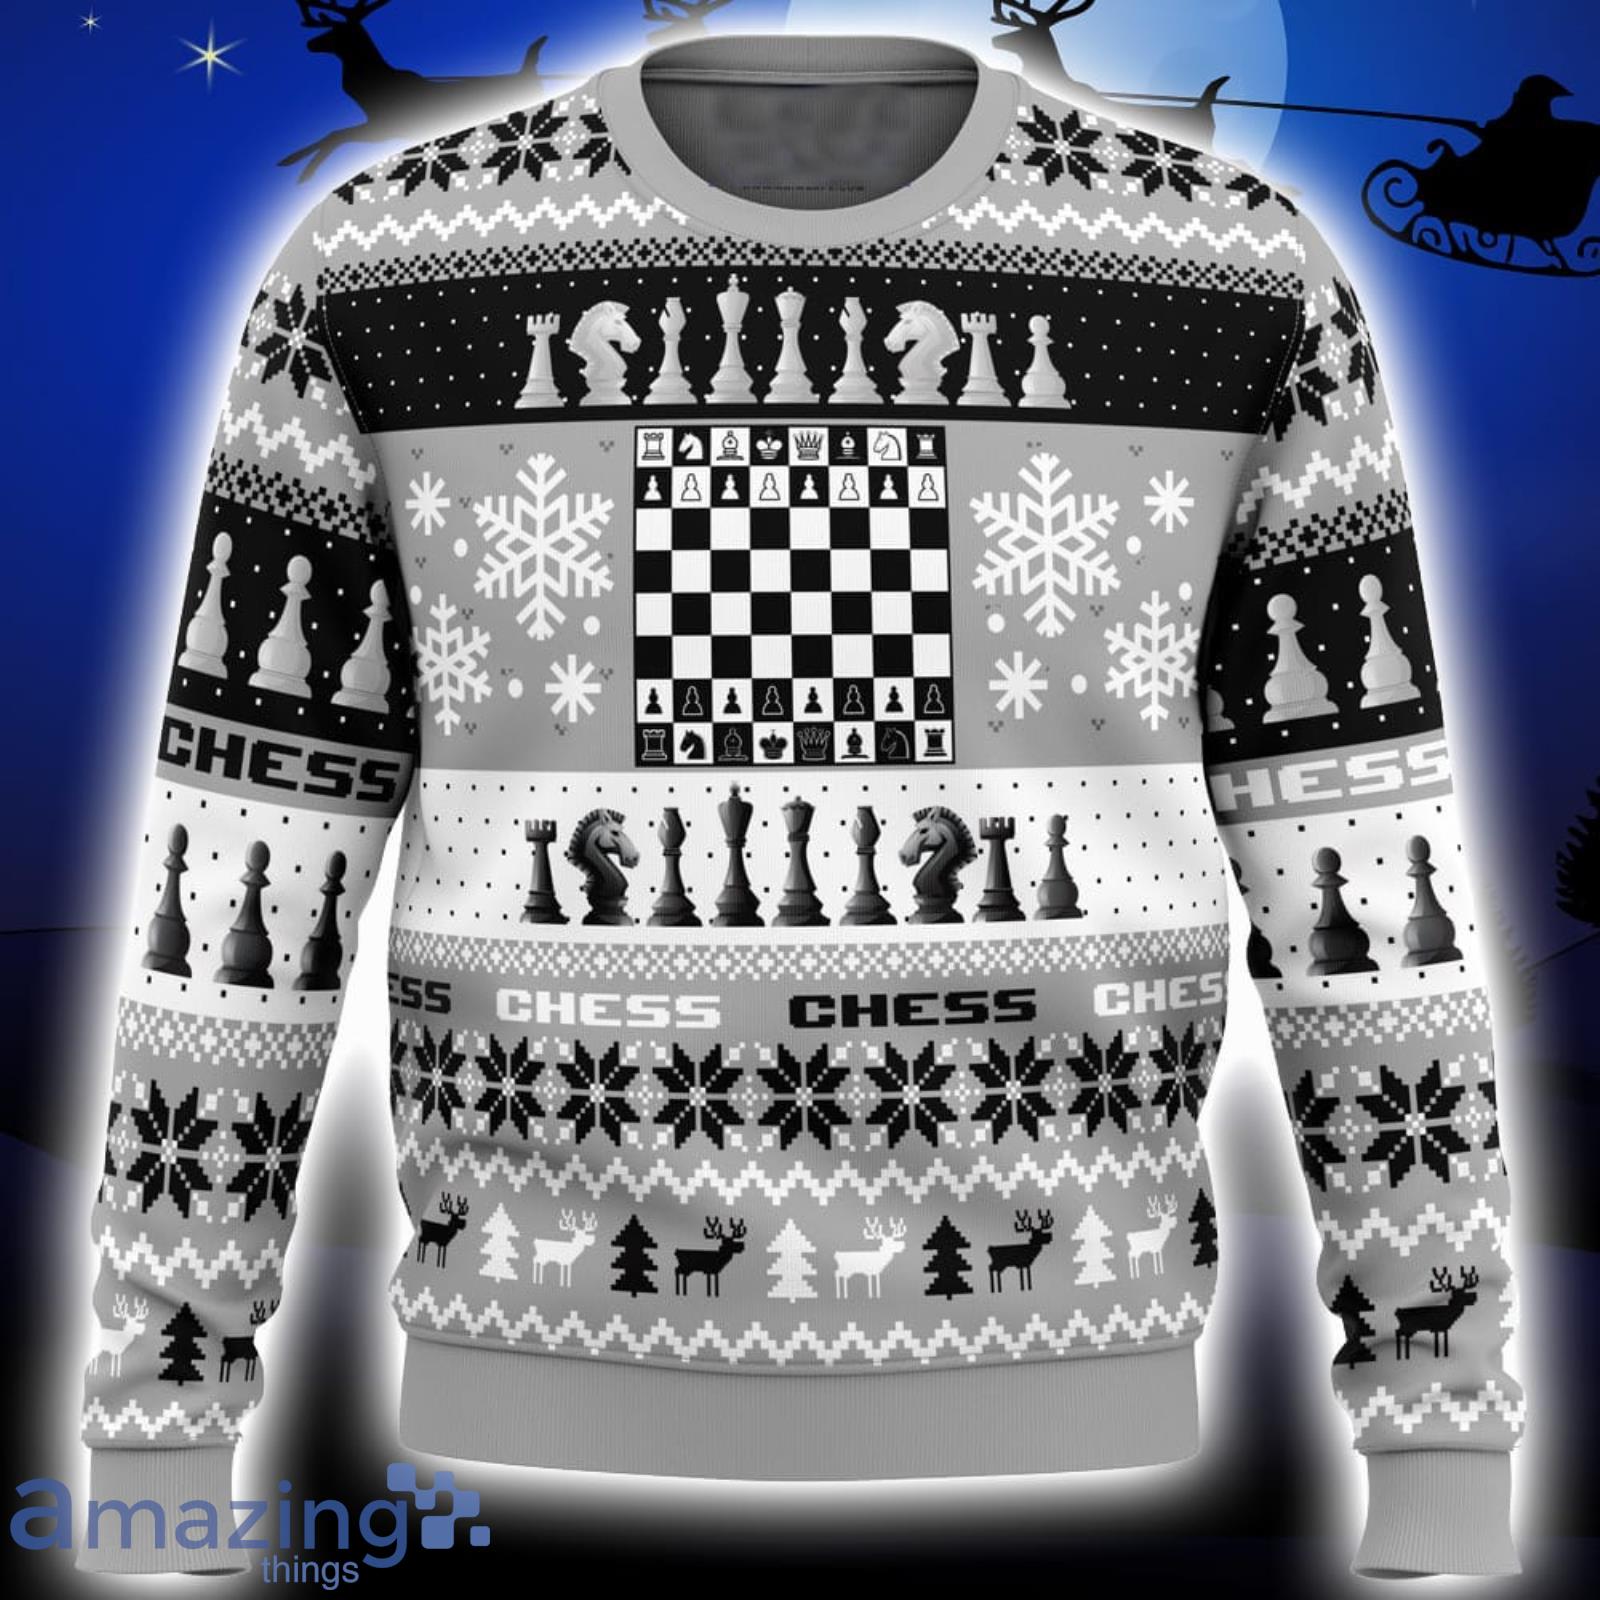 Chess is My Game. T-shirt for Chess Women Enthusiasts. A 3D 